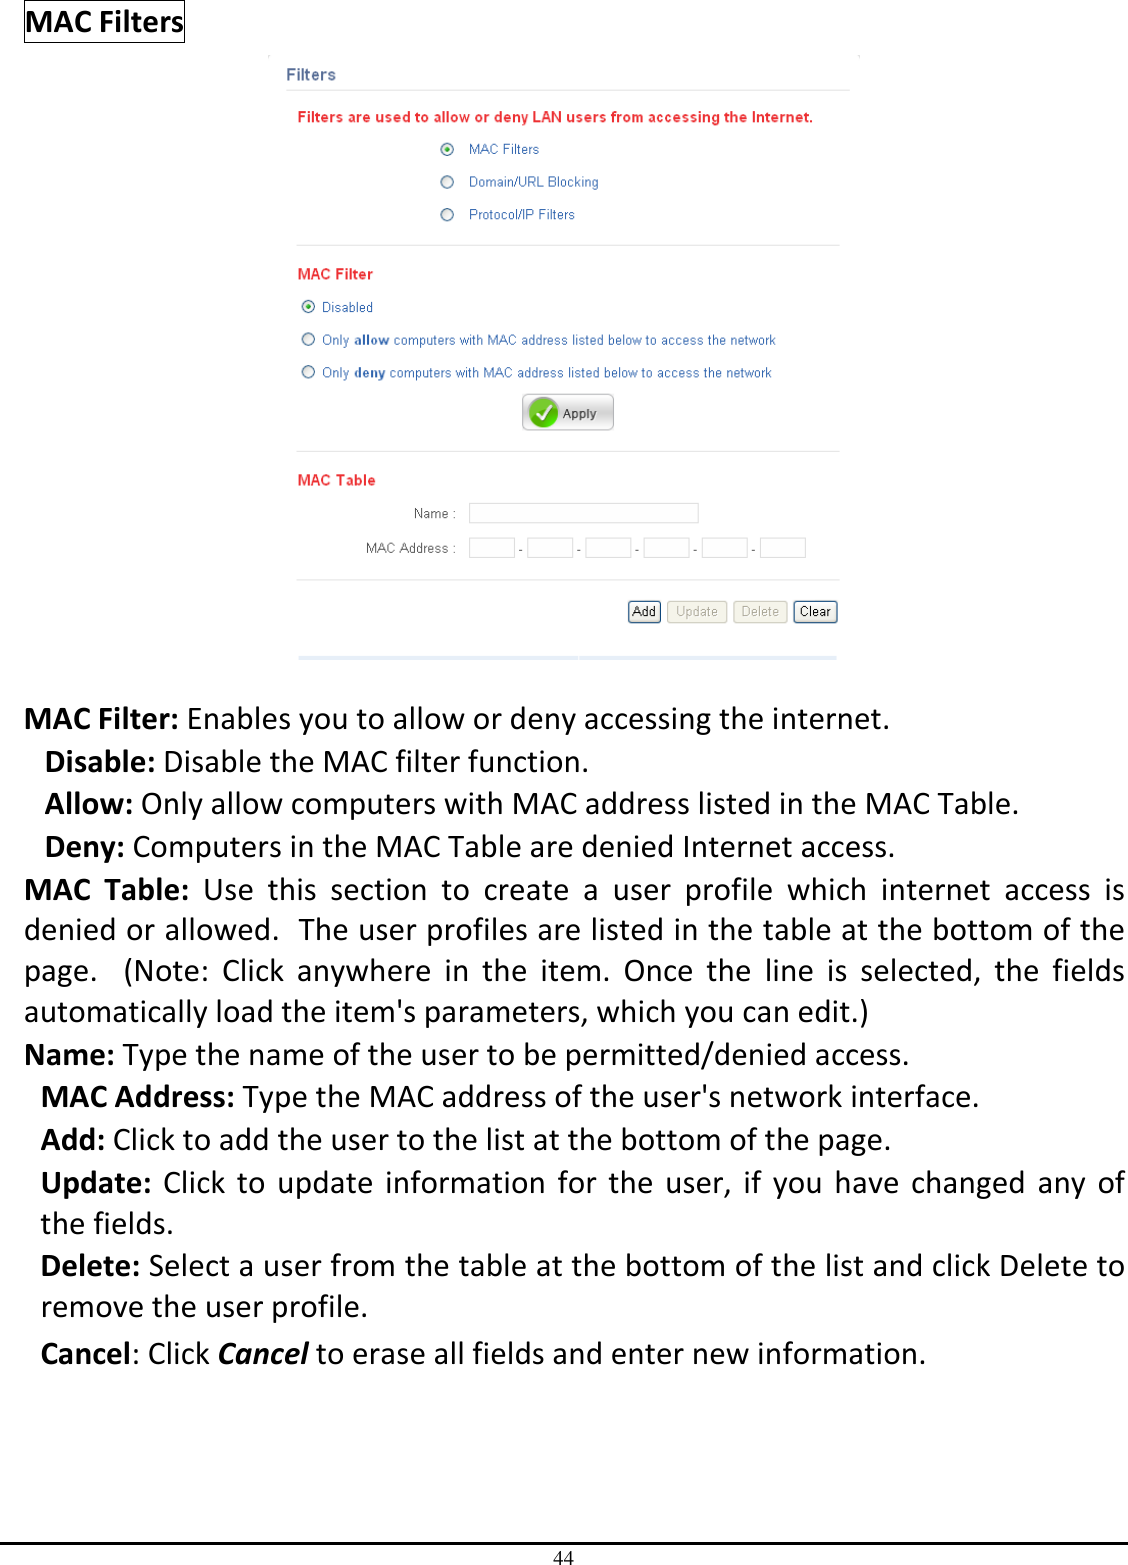 44 MAC Filters   MAC Filter: Enables you to allow or deny accessing the internet.  Disable: Disable the MAC filter function. Allow: Only allow computers with MAC address listed in the MAC Table. Deny: Computers in the MAC Table are denied Internet access. MAC  Table:  Use  this  section  to  create  a  user  profile  which  internet  access  is denied or allowed.  The user profiles are listed in the table at the bottom of the page.    (Note:  Click  anywhere  in  the  item.  Once  the  line  is  selected,  the  fields automatically load the item&apos;s parameters, which you can edit.) Name: Type the name of the user to be permitted/denied access. MAC Address: Type the MAC address of the user&apos;s network interface. Add: Click to add the user to the list at the bottom of the page. Update:  Click  to  update  information  for  the  user,  if  you  have  changed  any  of the fields. Delete: Select a user from the table at the bottom of the list and click Delete to remove the user profile. Cancel: Click Cancel to erase all fields and enter new information. 